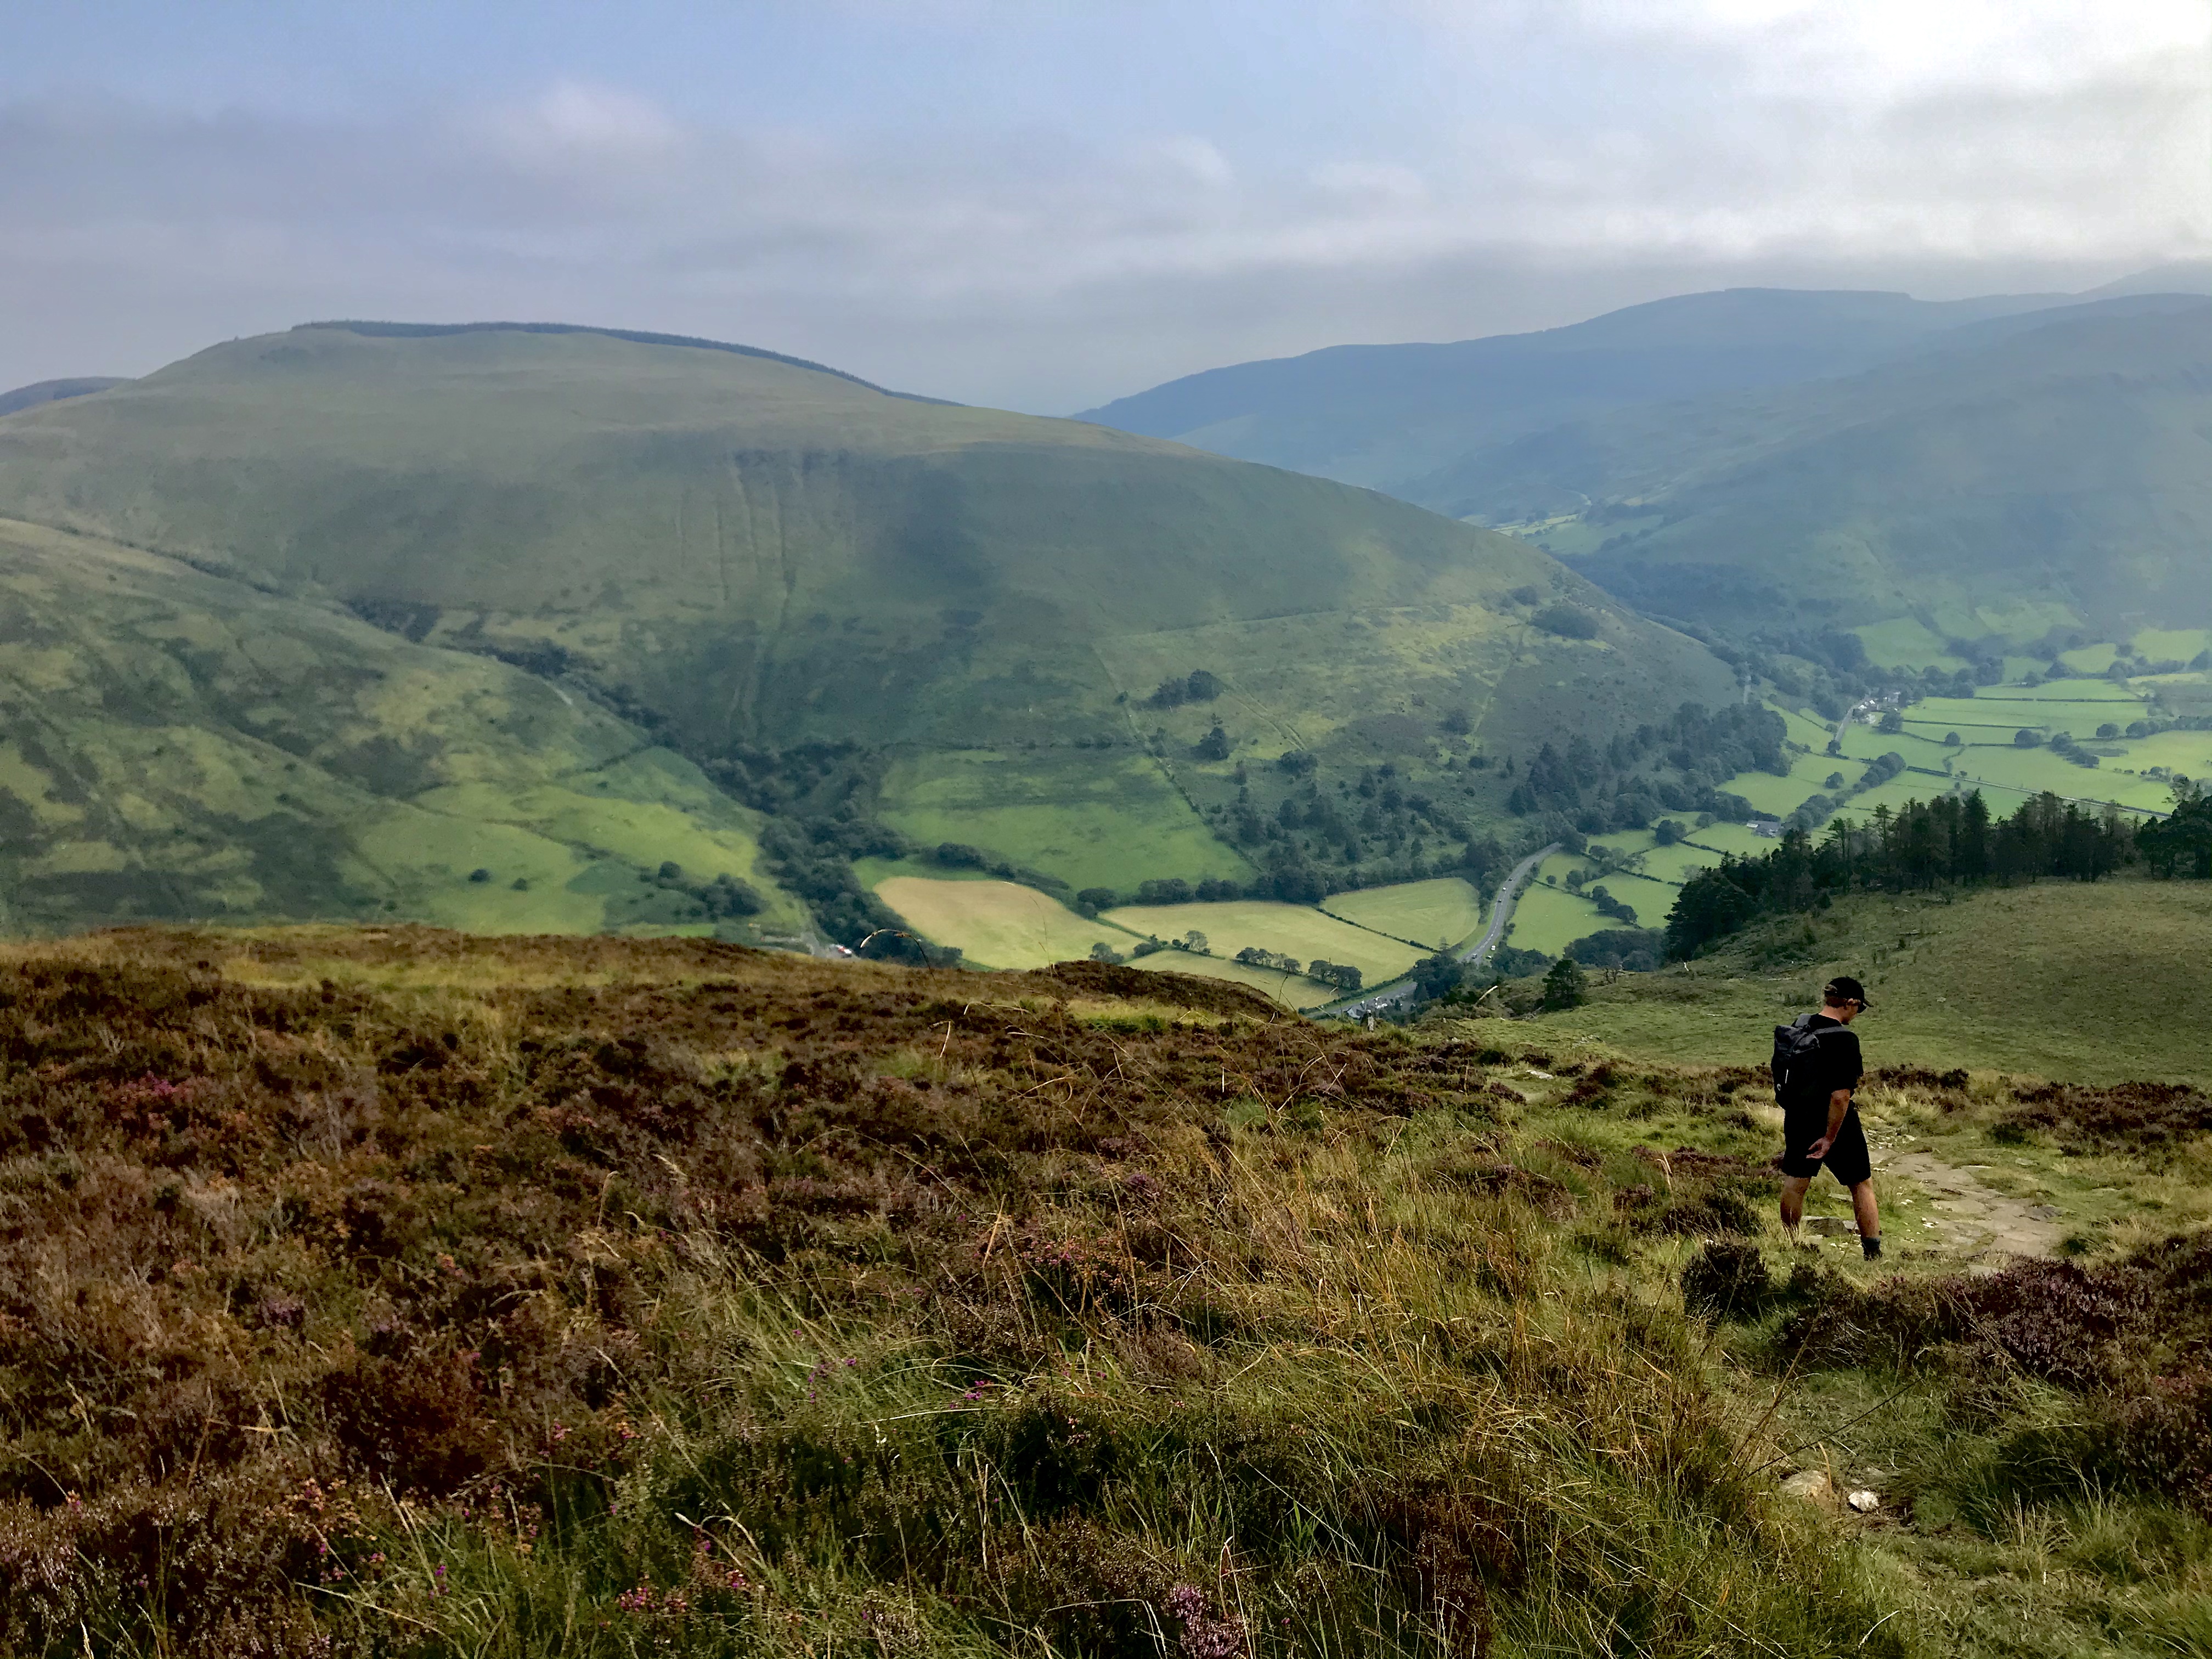 A man walking down a mountain, with heather in the foreground and green hills in the distance